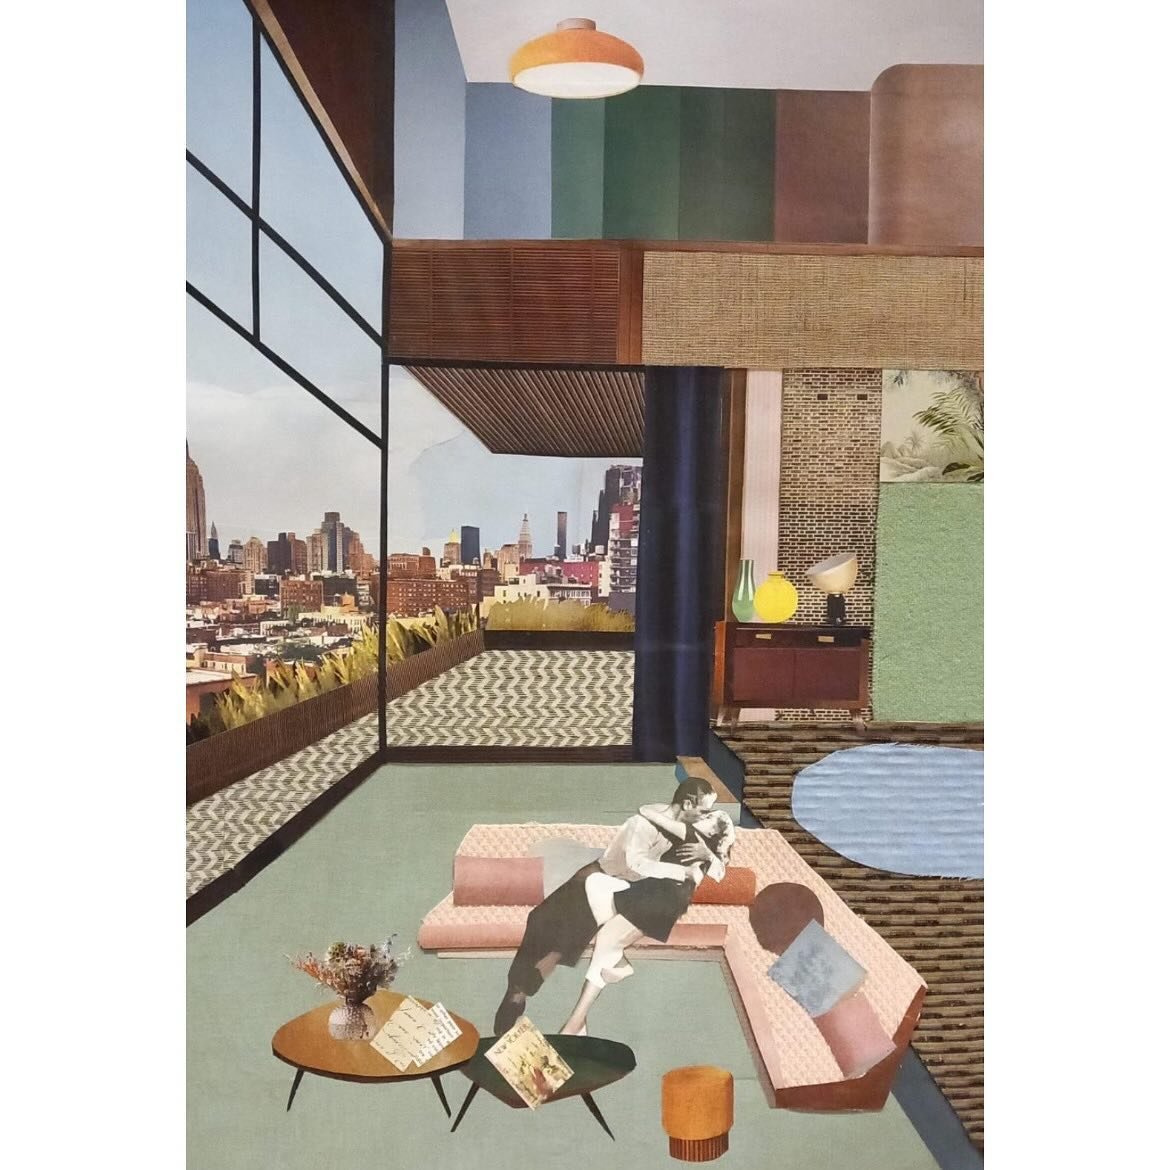 We&rsquo;re absolutely thrilled to have just taken delivery from Italy of more superb works by our artist Francesca Lupo.

A trained architect, Francesca&rsquo;s work is recognised for its novelty and innovation. Her collages mix materials &ndash; th